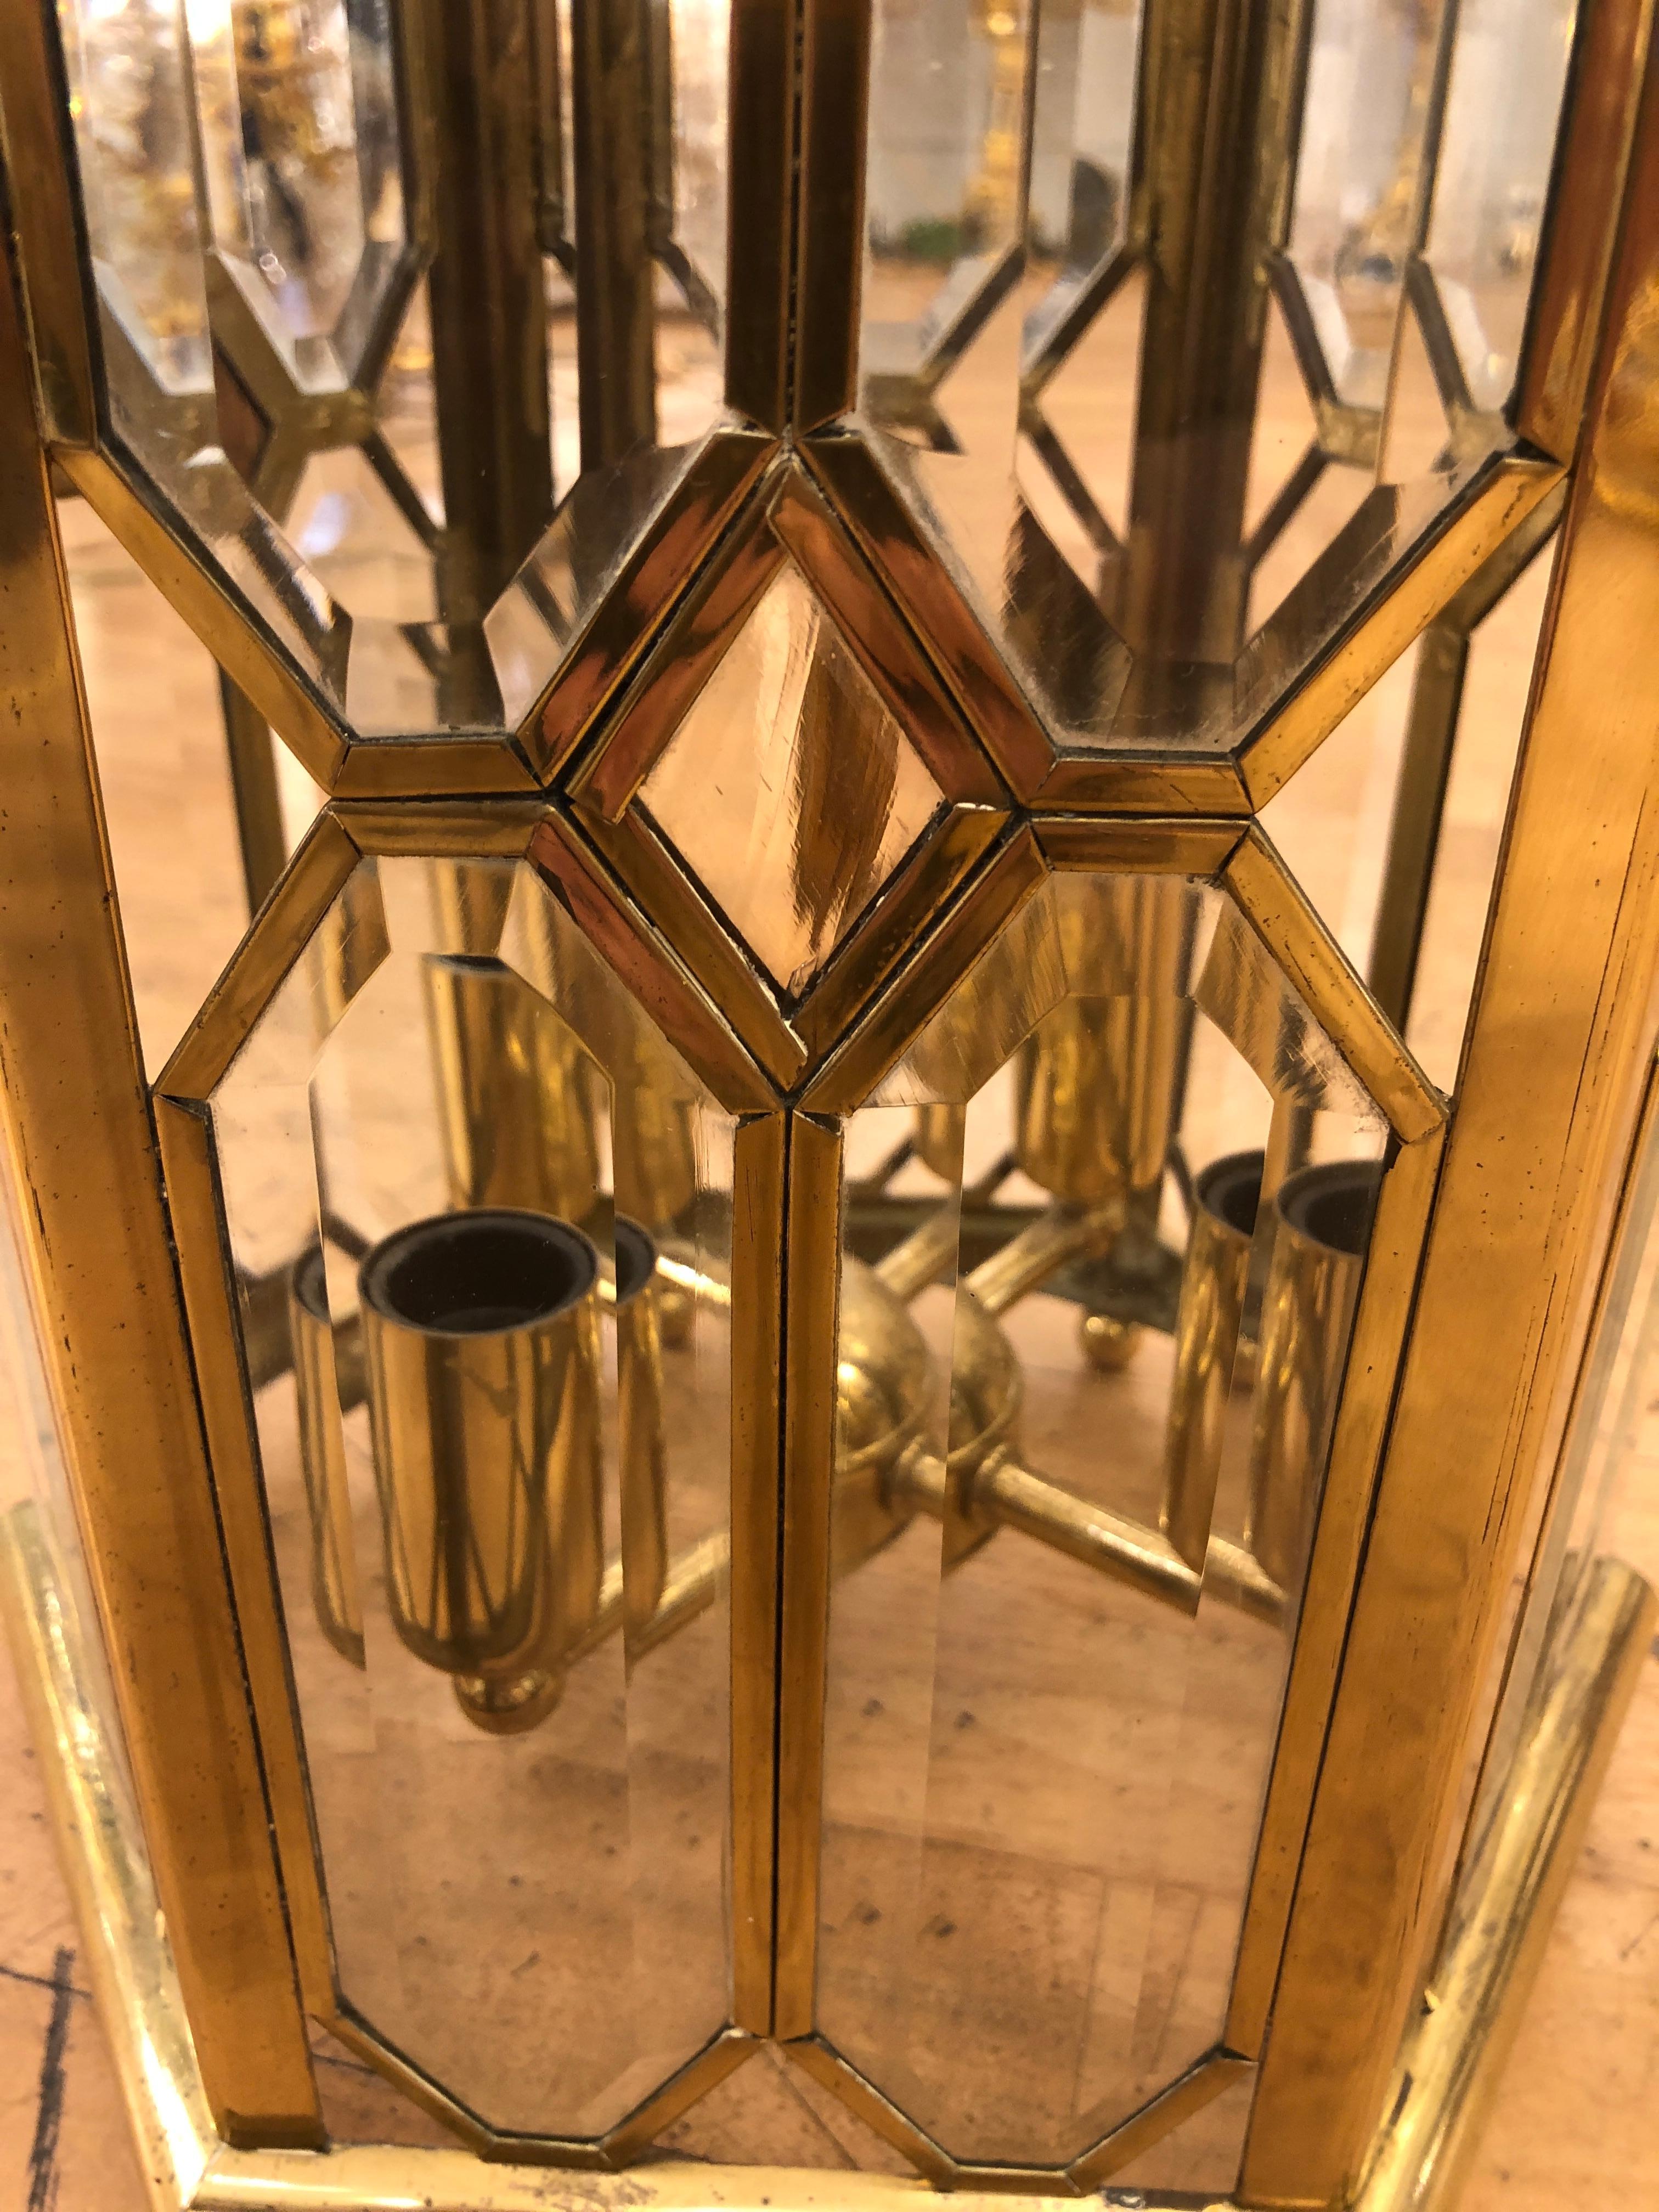 A beautiful brass and glazed lantern. Part of a set of three matching lanterns. NOW ONLY TWO AVAILABLE AS ONE SOLD. Price is for one lantern only. The six sided lantern features 4 glass panels in each face with a diamond central panel and open